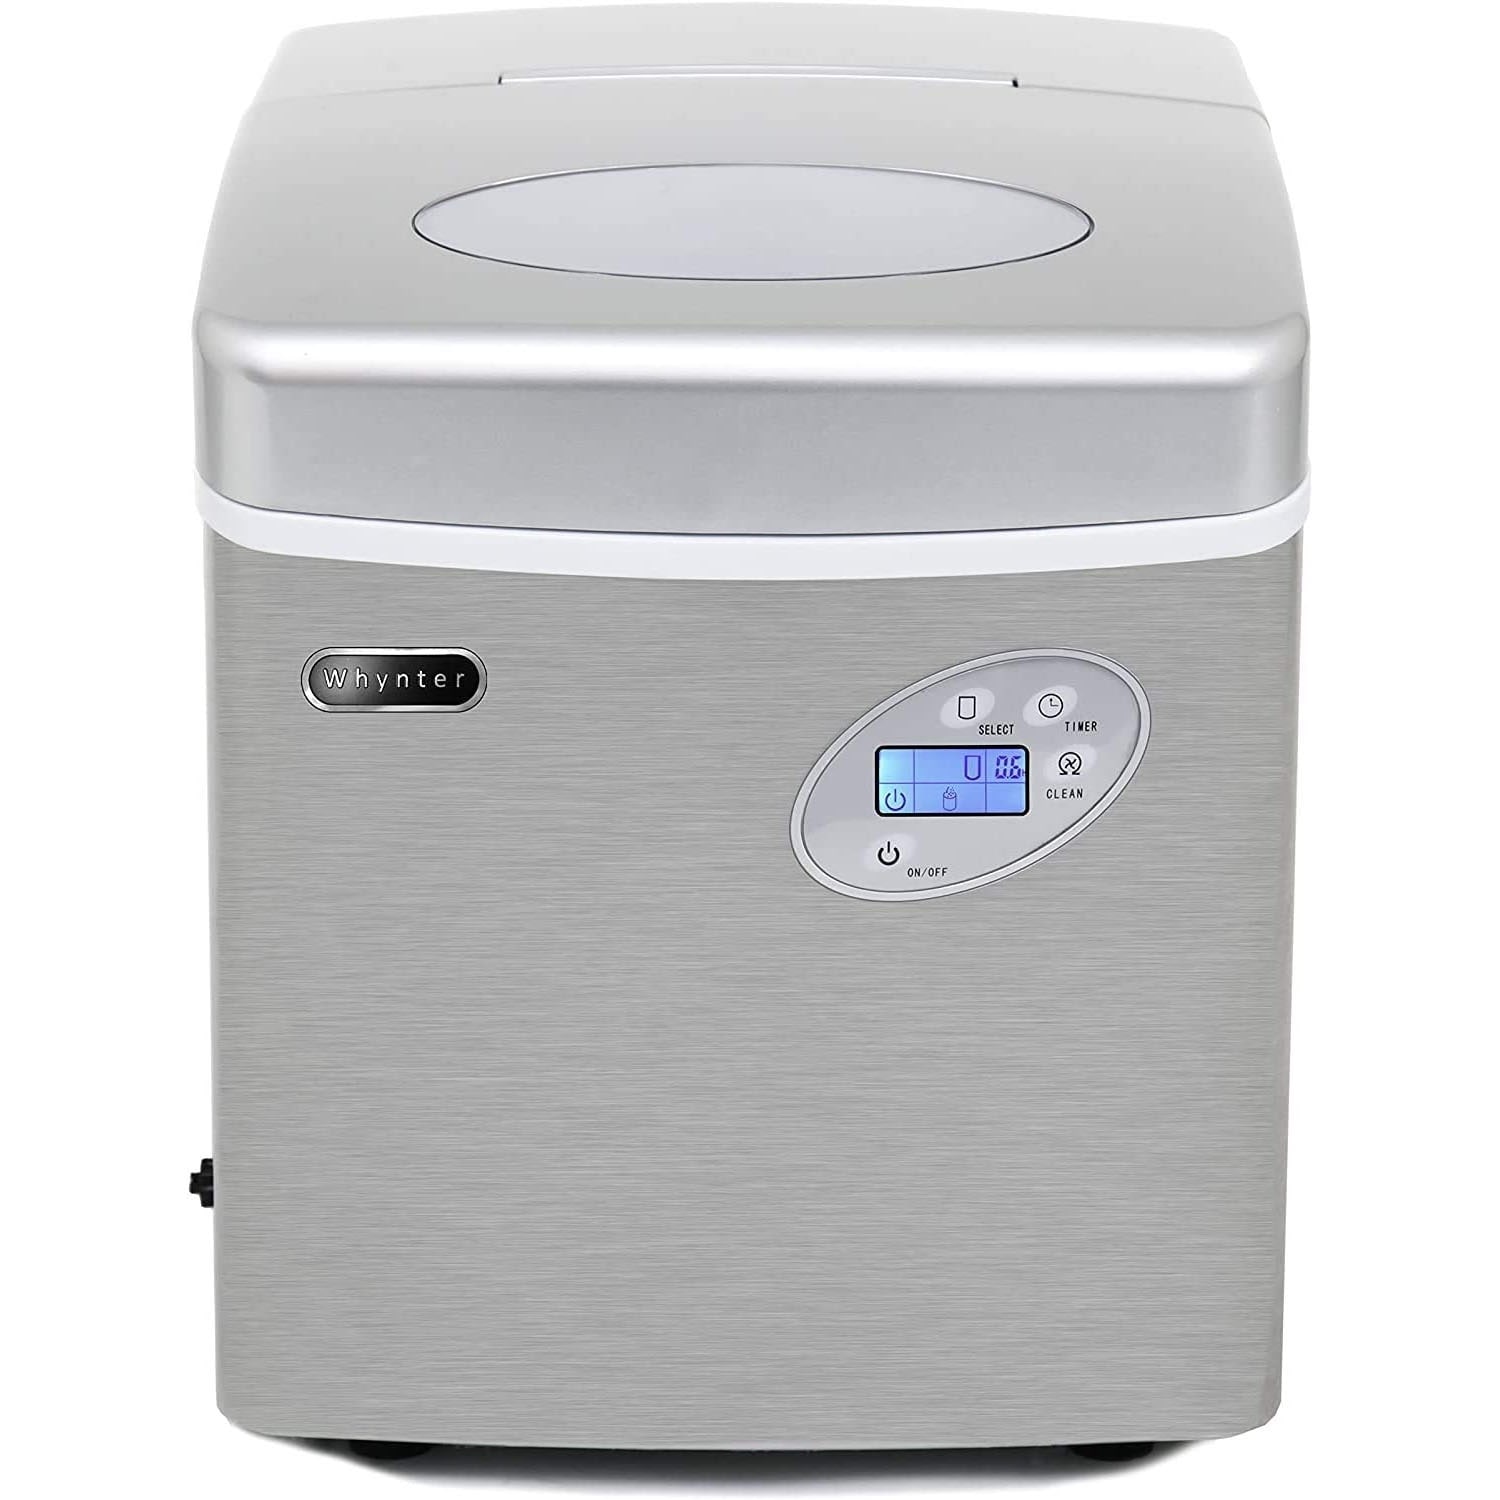 Whynter Compact Ice Maker, 27 LBs, Silver and 2 Year Extended Warranty -  Bed Bath & Beyond - 37184395